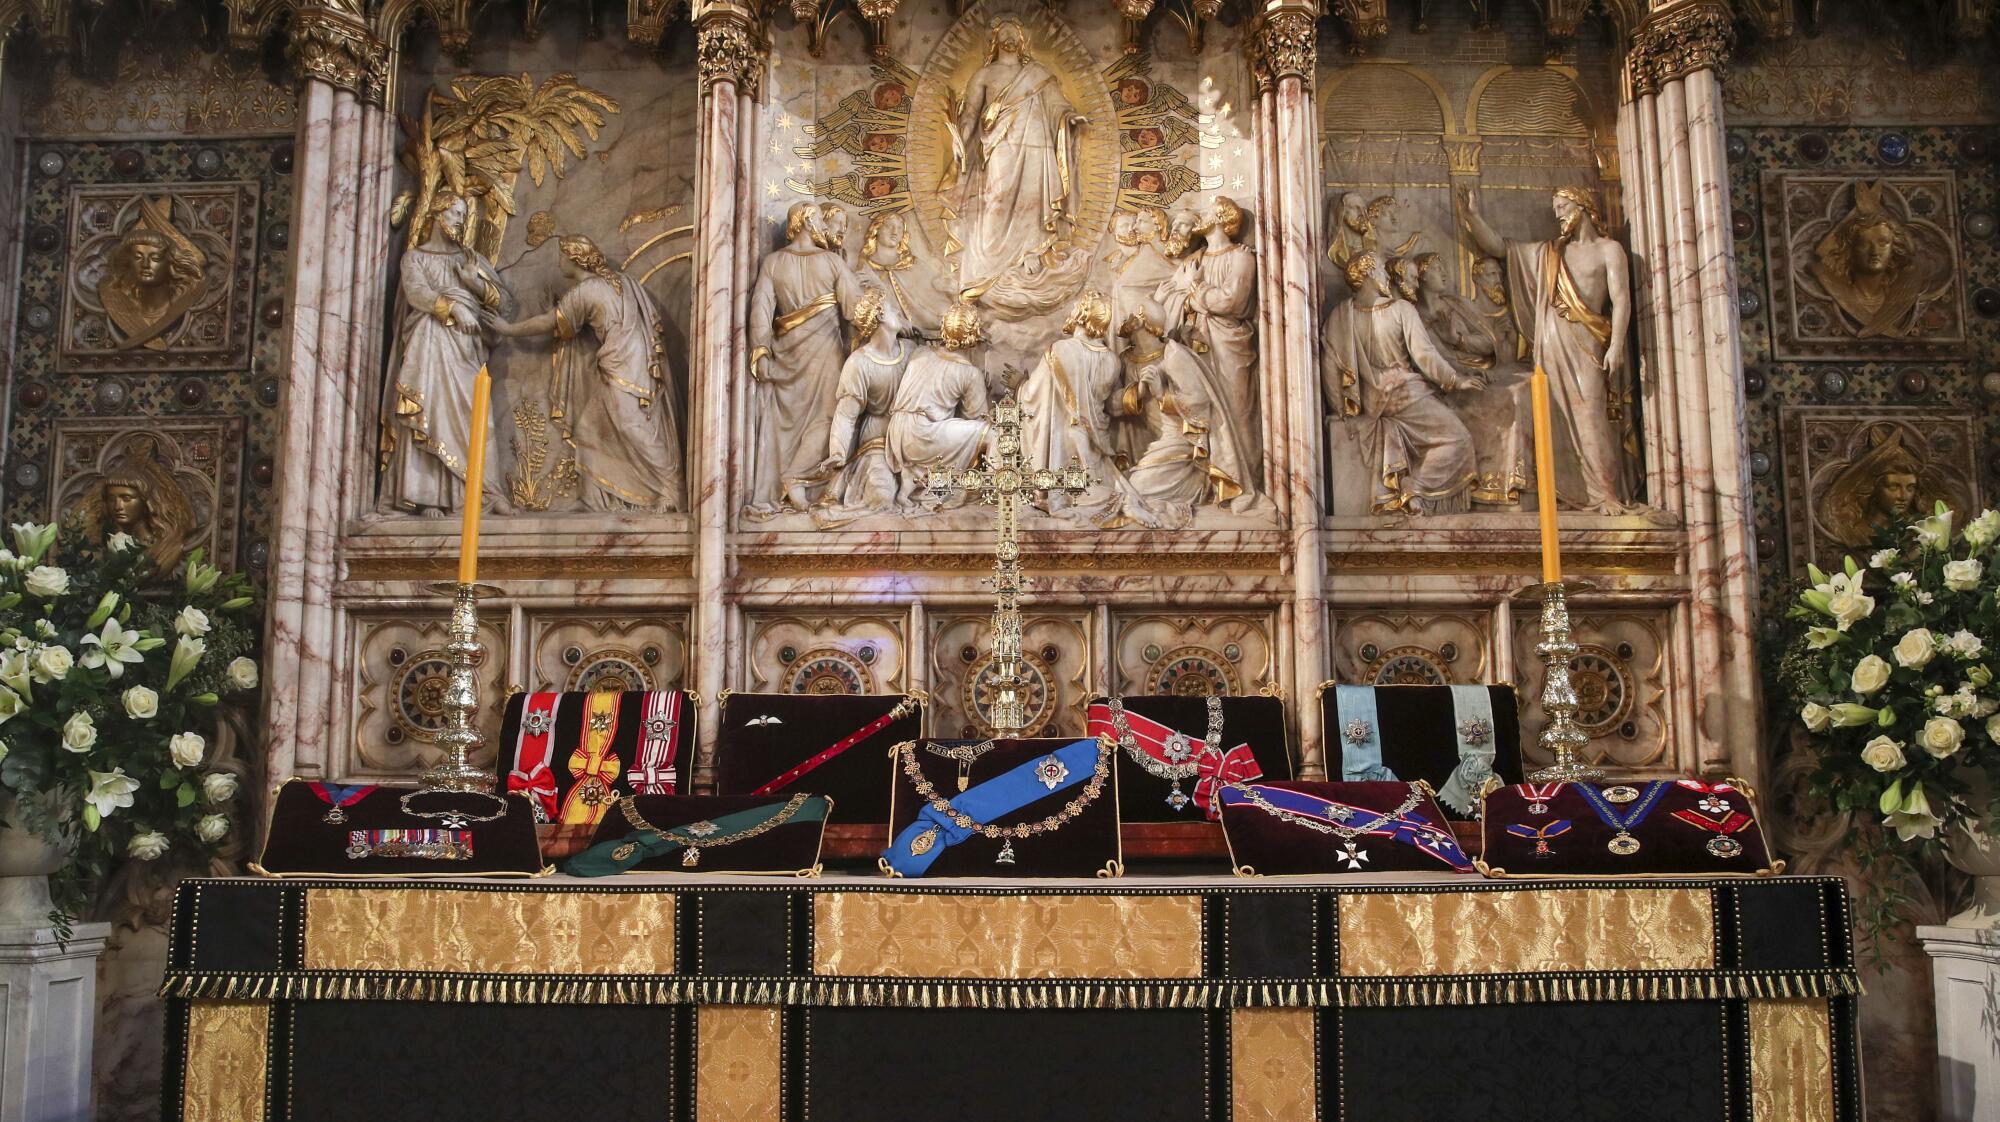 Prince Philip's insignias are on display on the altar in St. George's Chapel.